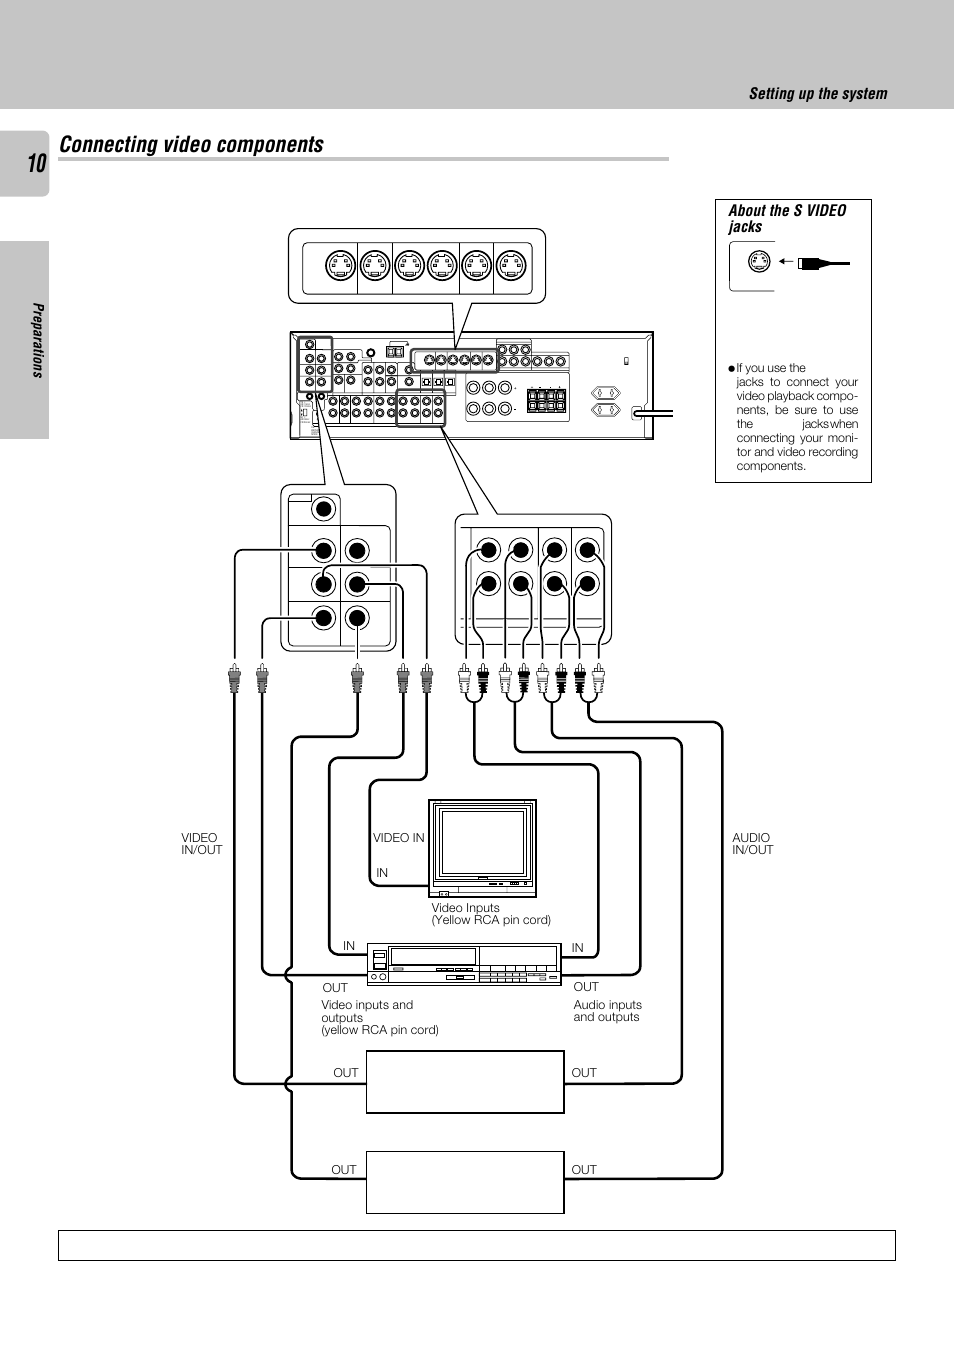 Connecting video components, Setting up the system, About the s video jacks | Preparations, Video 3 video 2 video 1 s video, Play in, Play in rec out play in monitor out video 1 dvd, S video jacks video in/out audio in/out | Kenwood KRF-X9050D User Manual | Page 10 / 52